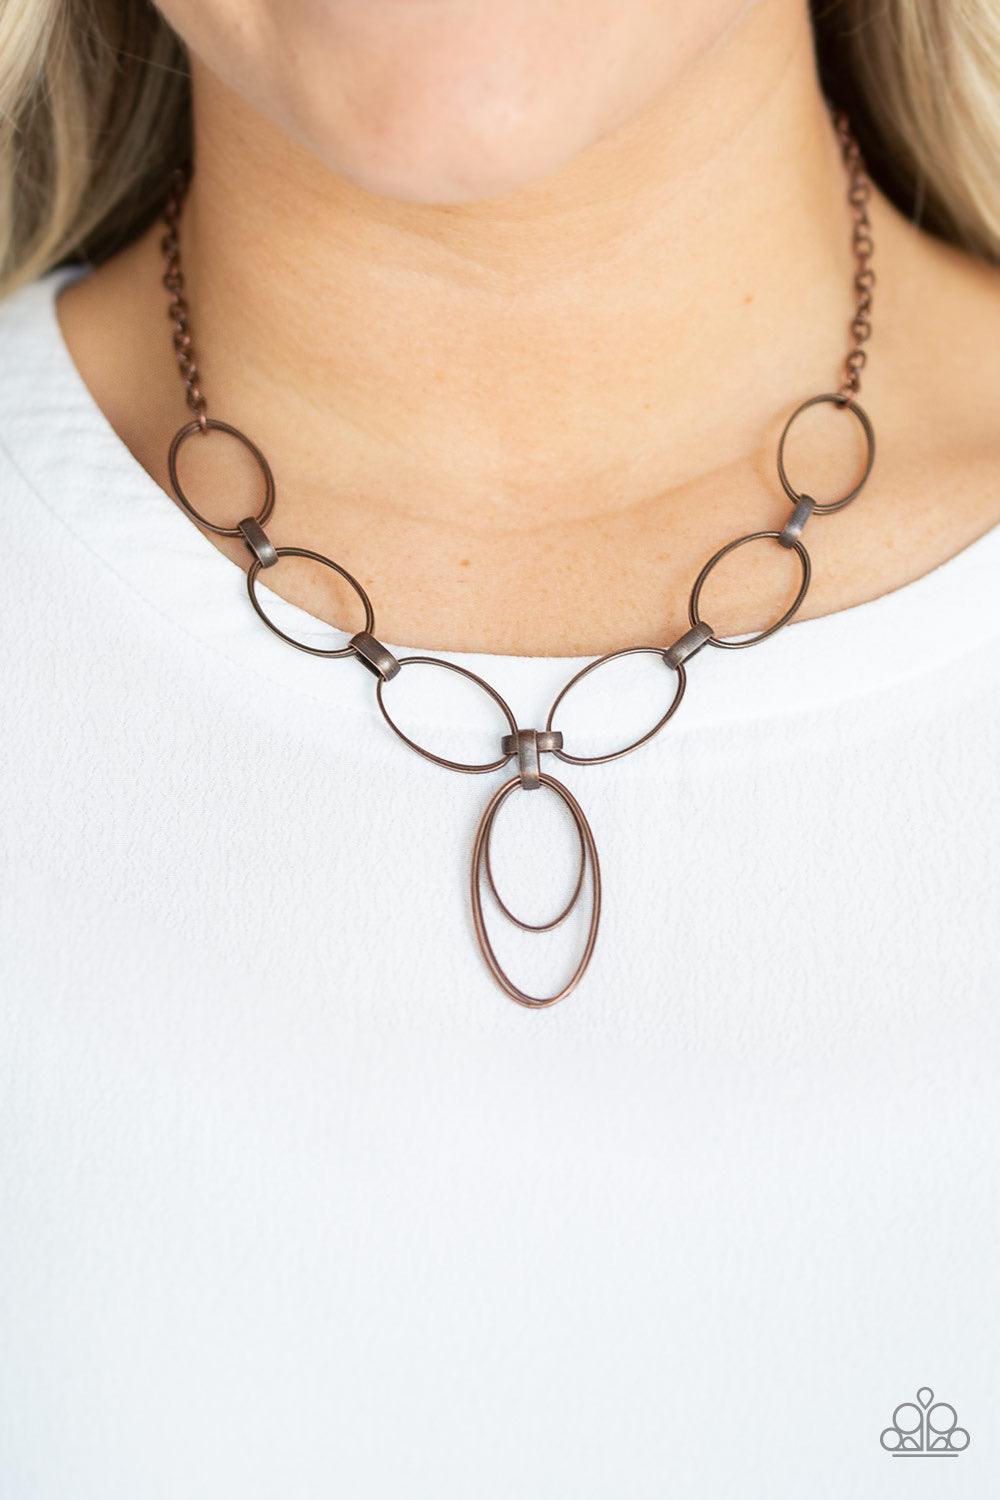 Paparazzi Accessories All OVAL Town - Copper Varying in size, a collection of oval frames swing from the bottom of a strand of double-linked oval frames, creating a casual pendant below the collar. Features an adjustable clasp closure. Jewelry